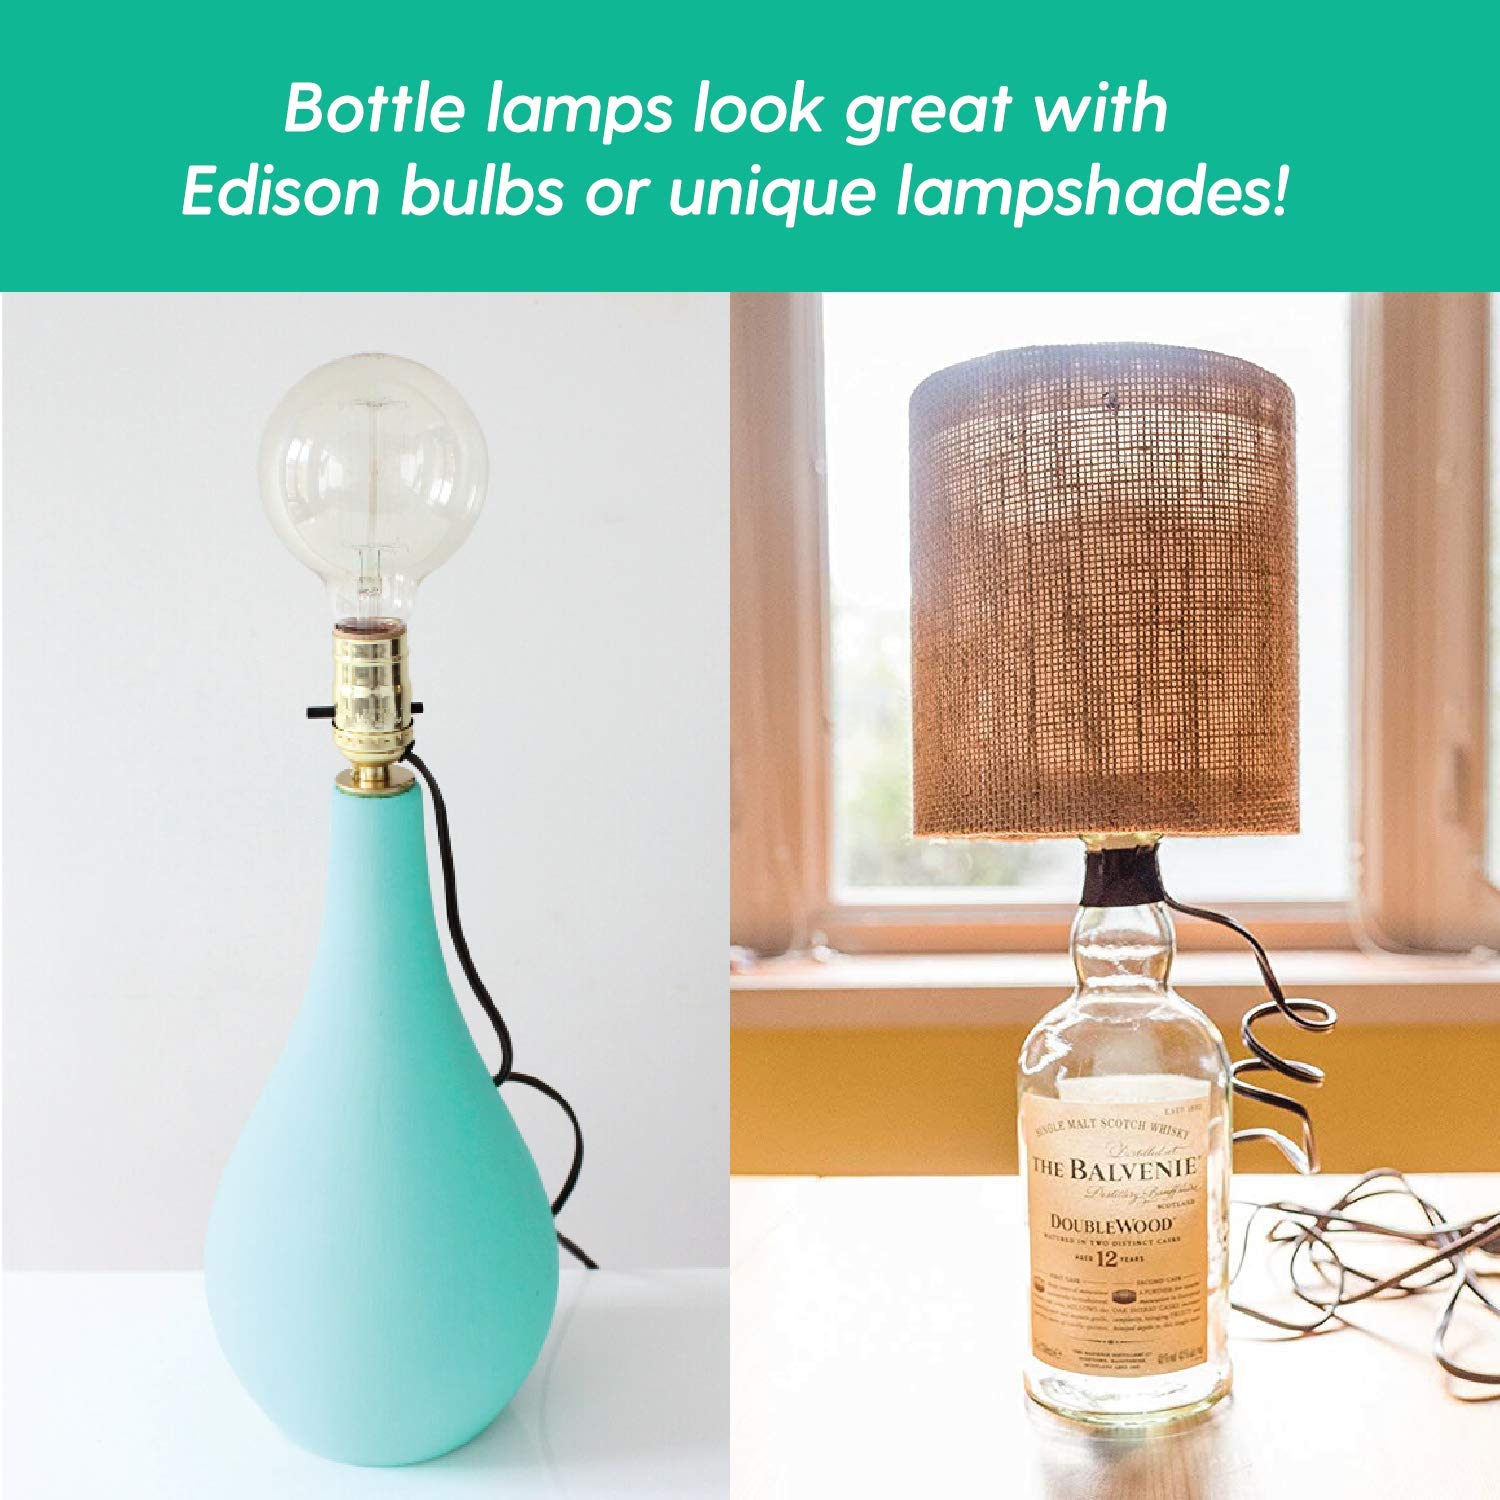 Jandorf Make-A-Lamp Kit with Bottle Adapter - Midwest Technology Products